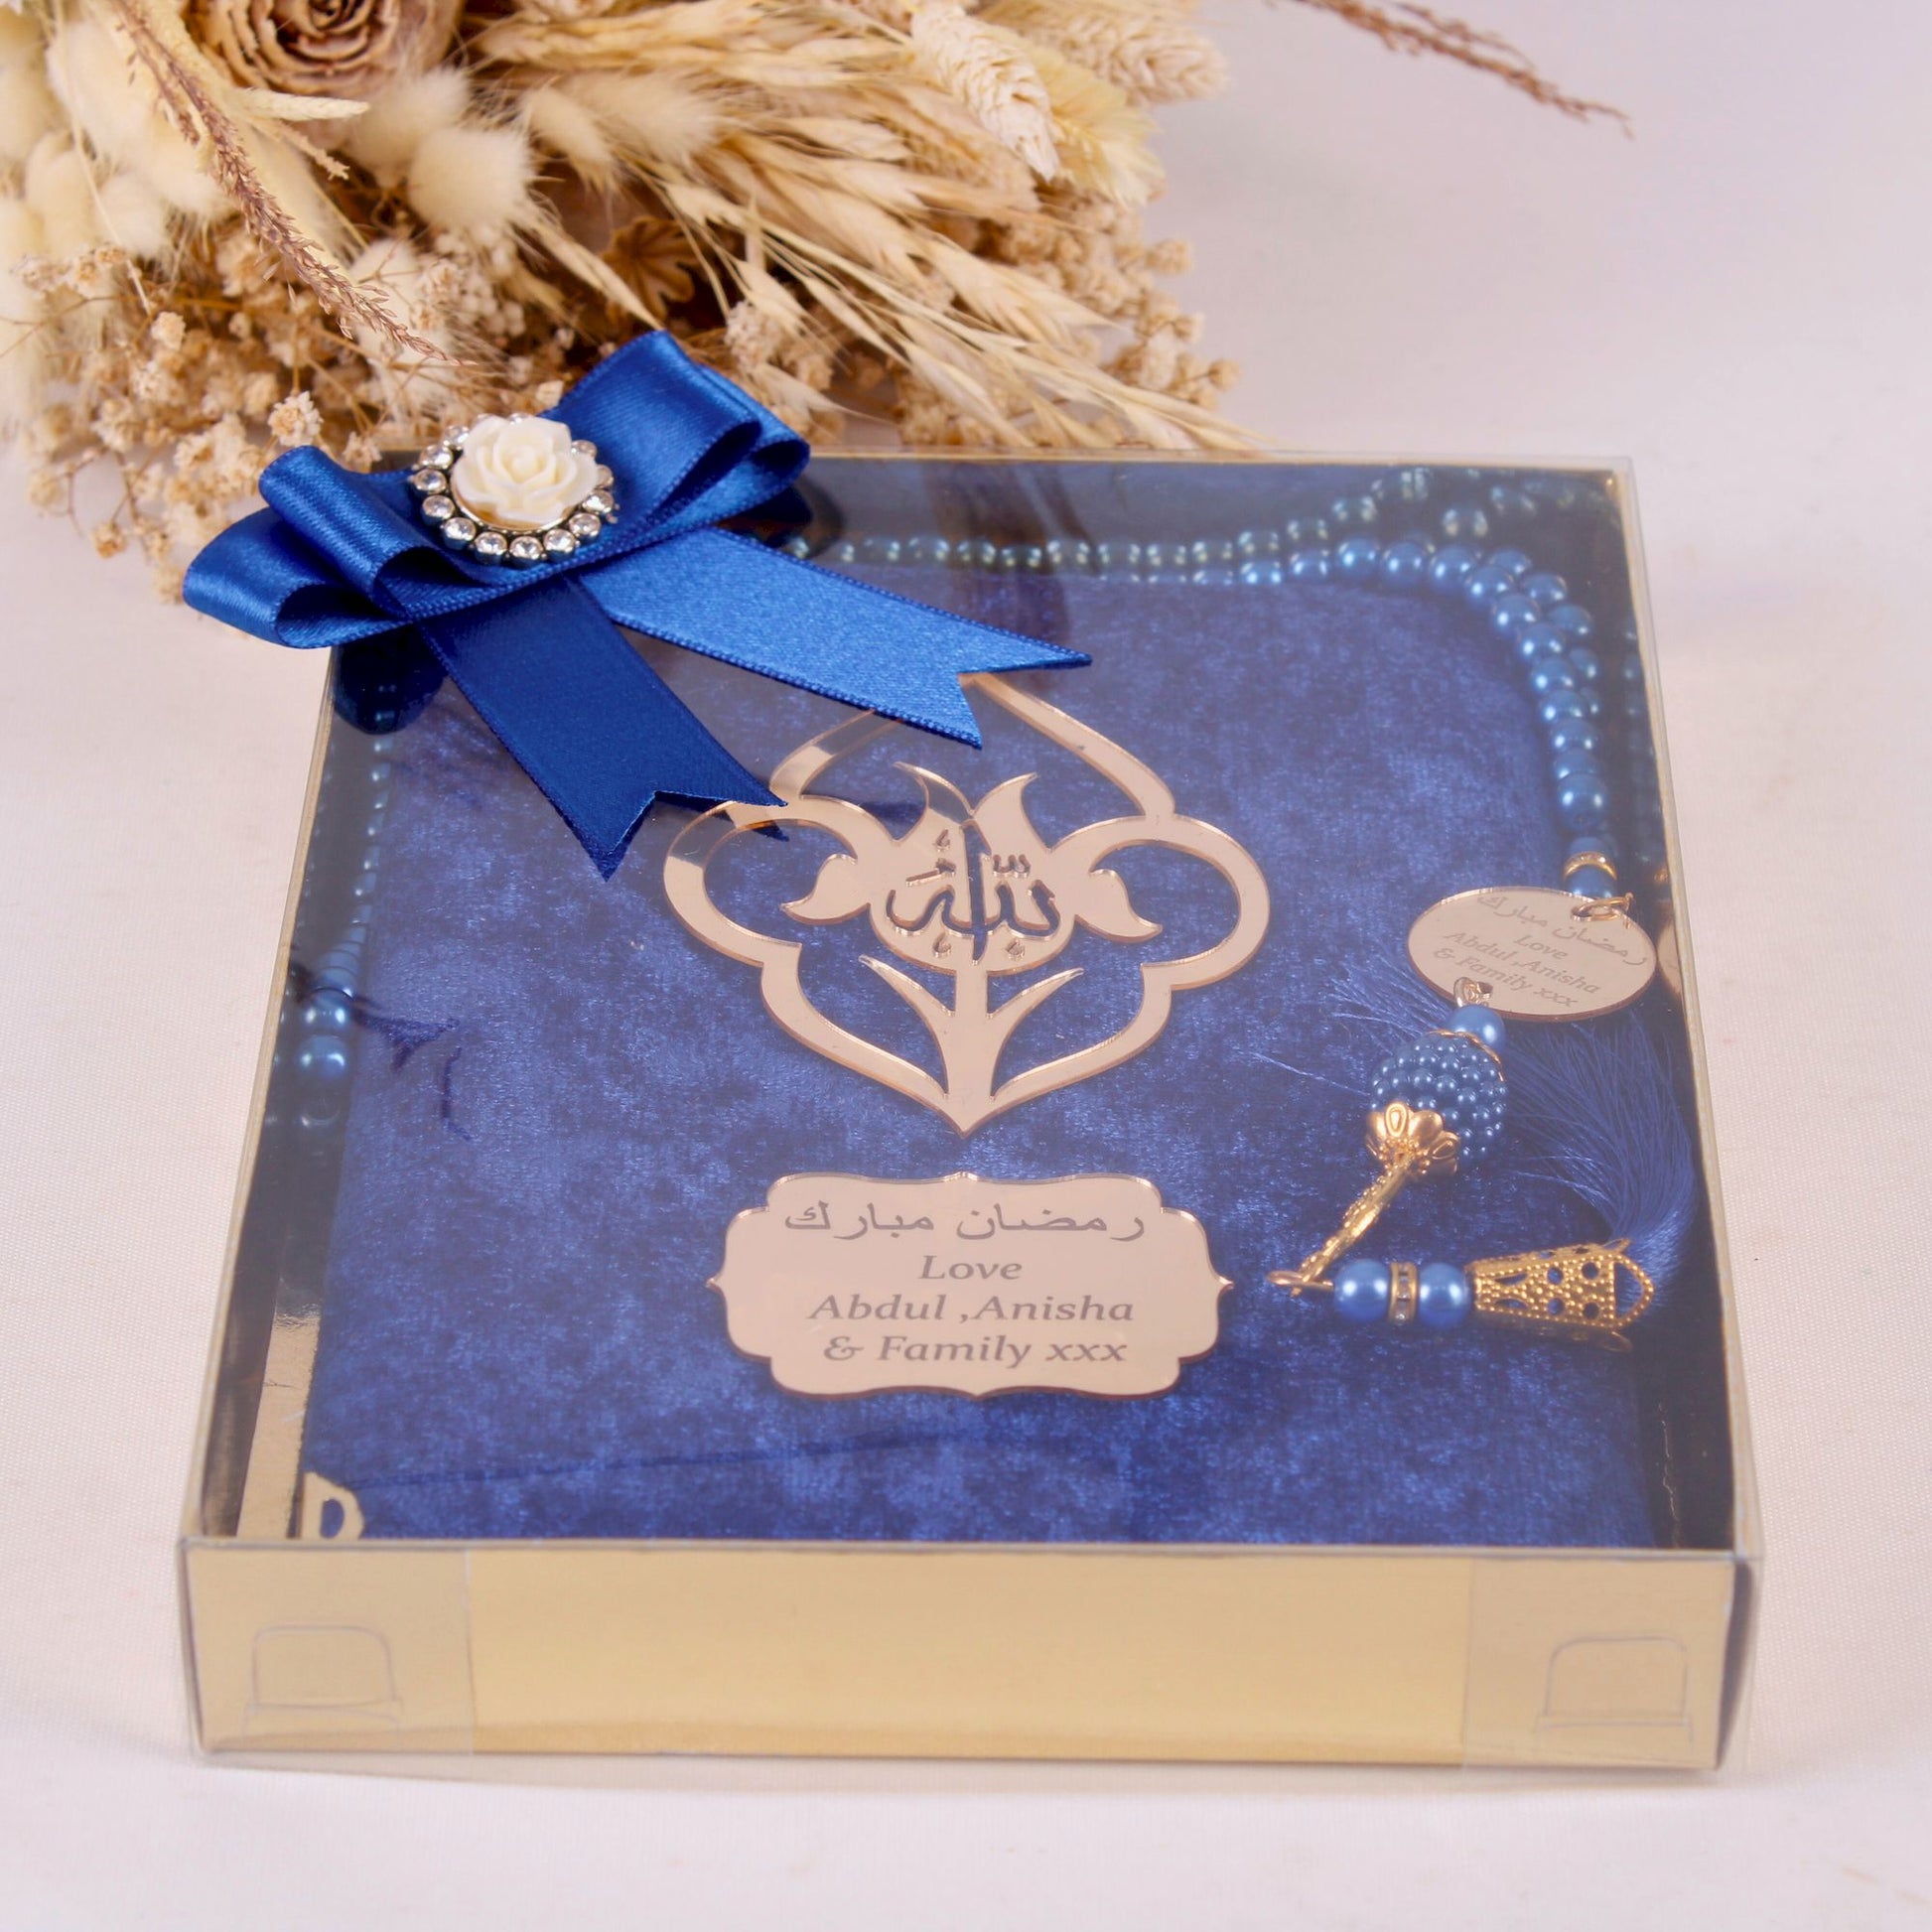 Personalized Wedding Favor Velvet Dua Book Pearl Tasbeeh Tulip Theme - Islamic Elite Favors is a handmade gift shop offering a wide variety of unique and personalized gifts for all occasions. Whether you're looking for the perfect Ramadan, Eid, Hajj, wedding gift or something special for a birthday, baby shower or anniversary, we have something for everyone. High quality, made with love.